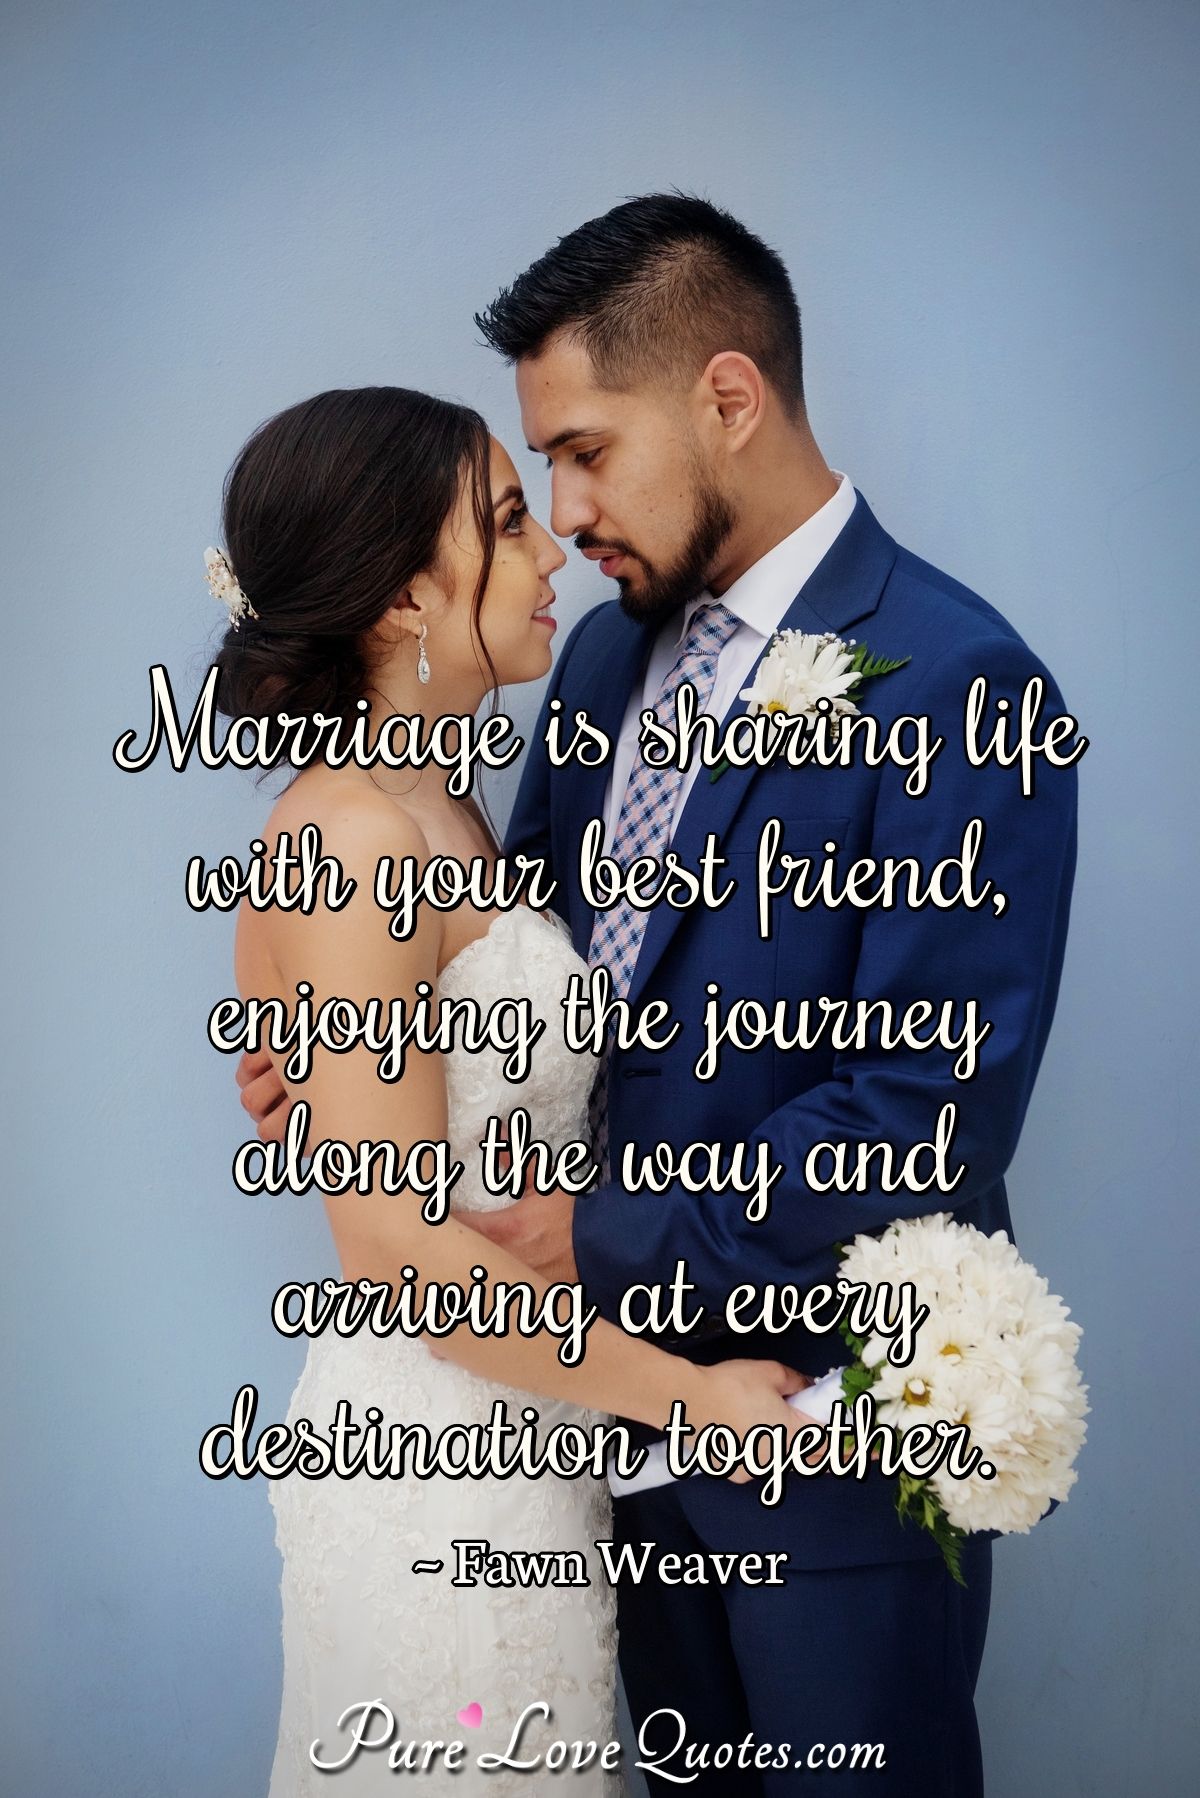 Marry your best friend quote